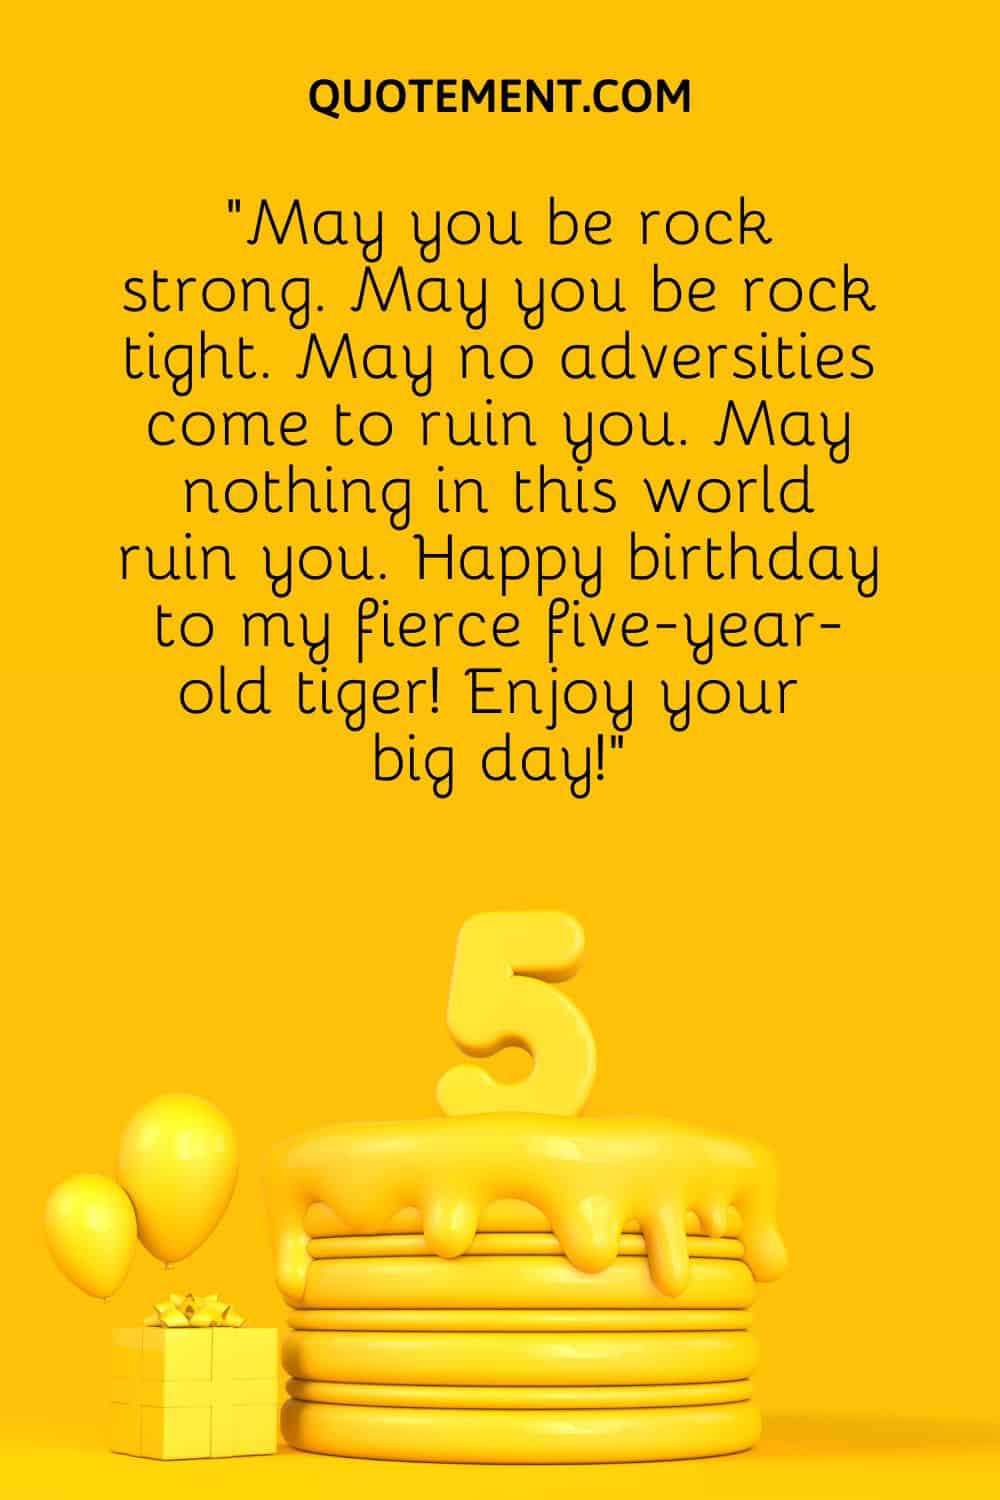 “May you be rock strong. May you be rock tight. May no adversities come to ruin you. May nothing in this world ruin you. Happy birthday to my fierce five-year-old tiger! Enjoy your big day!”